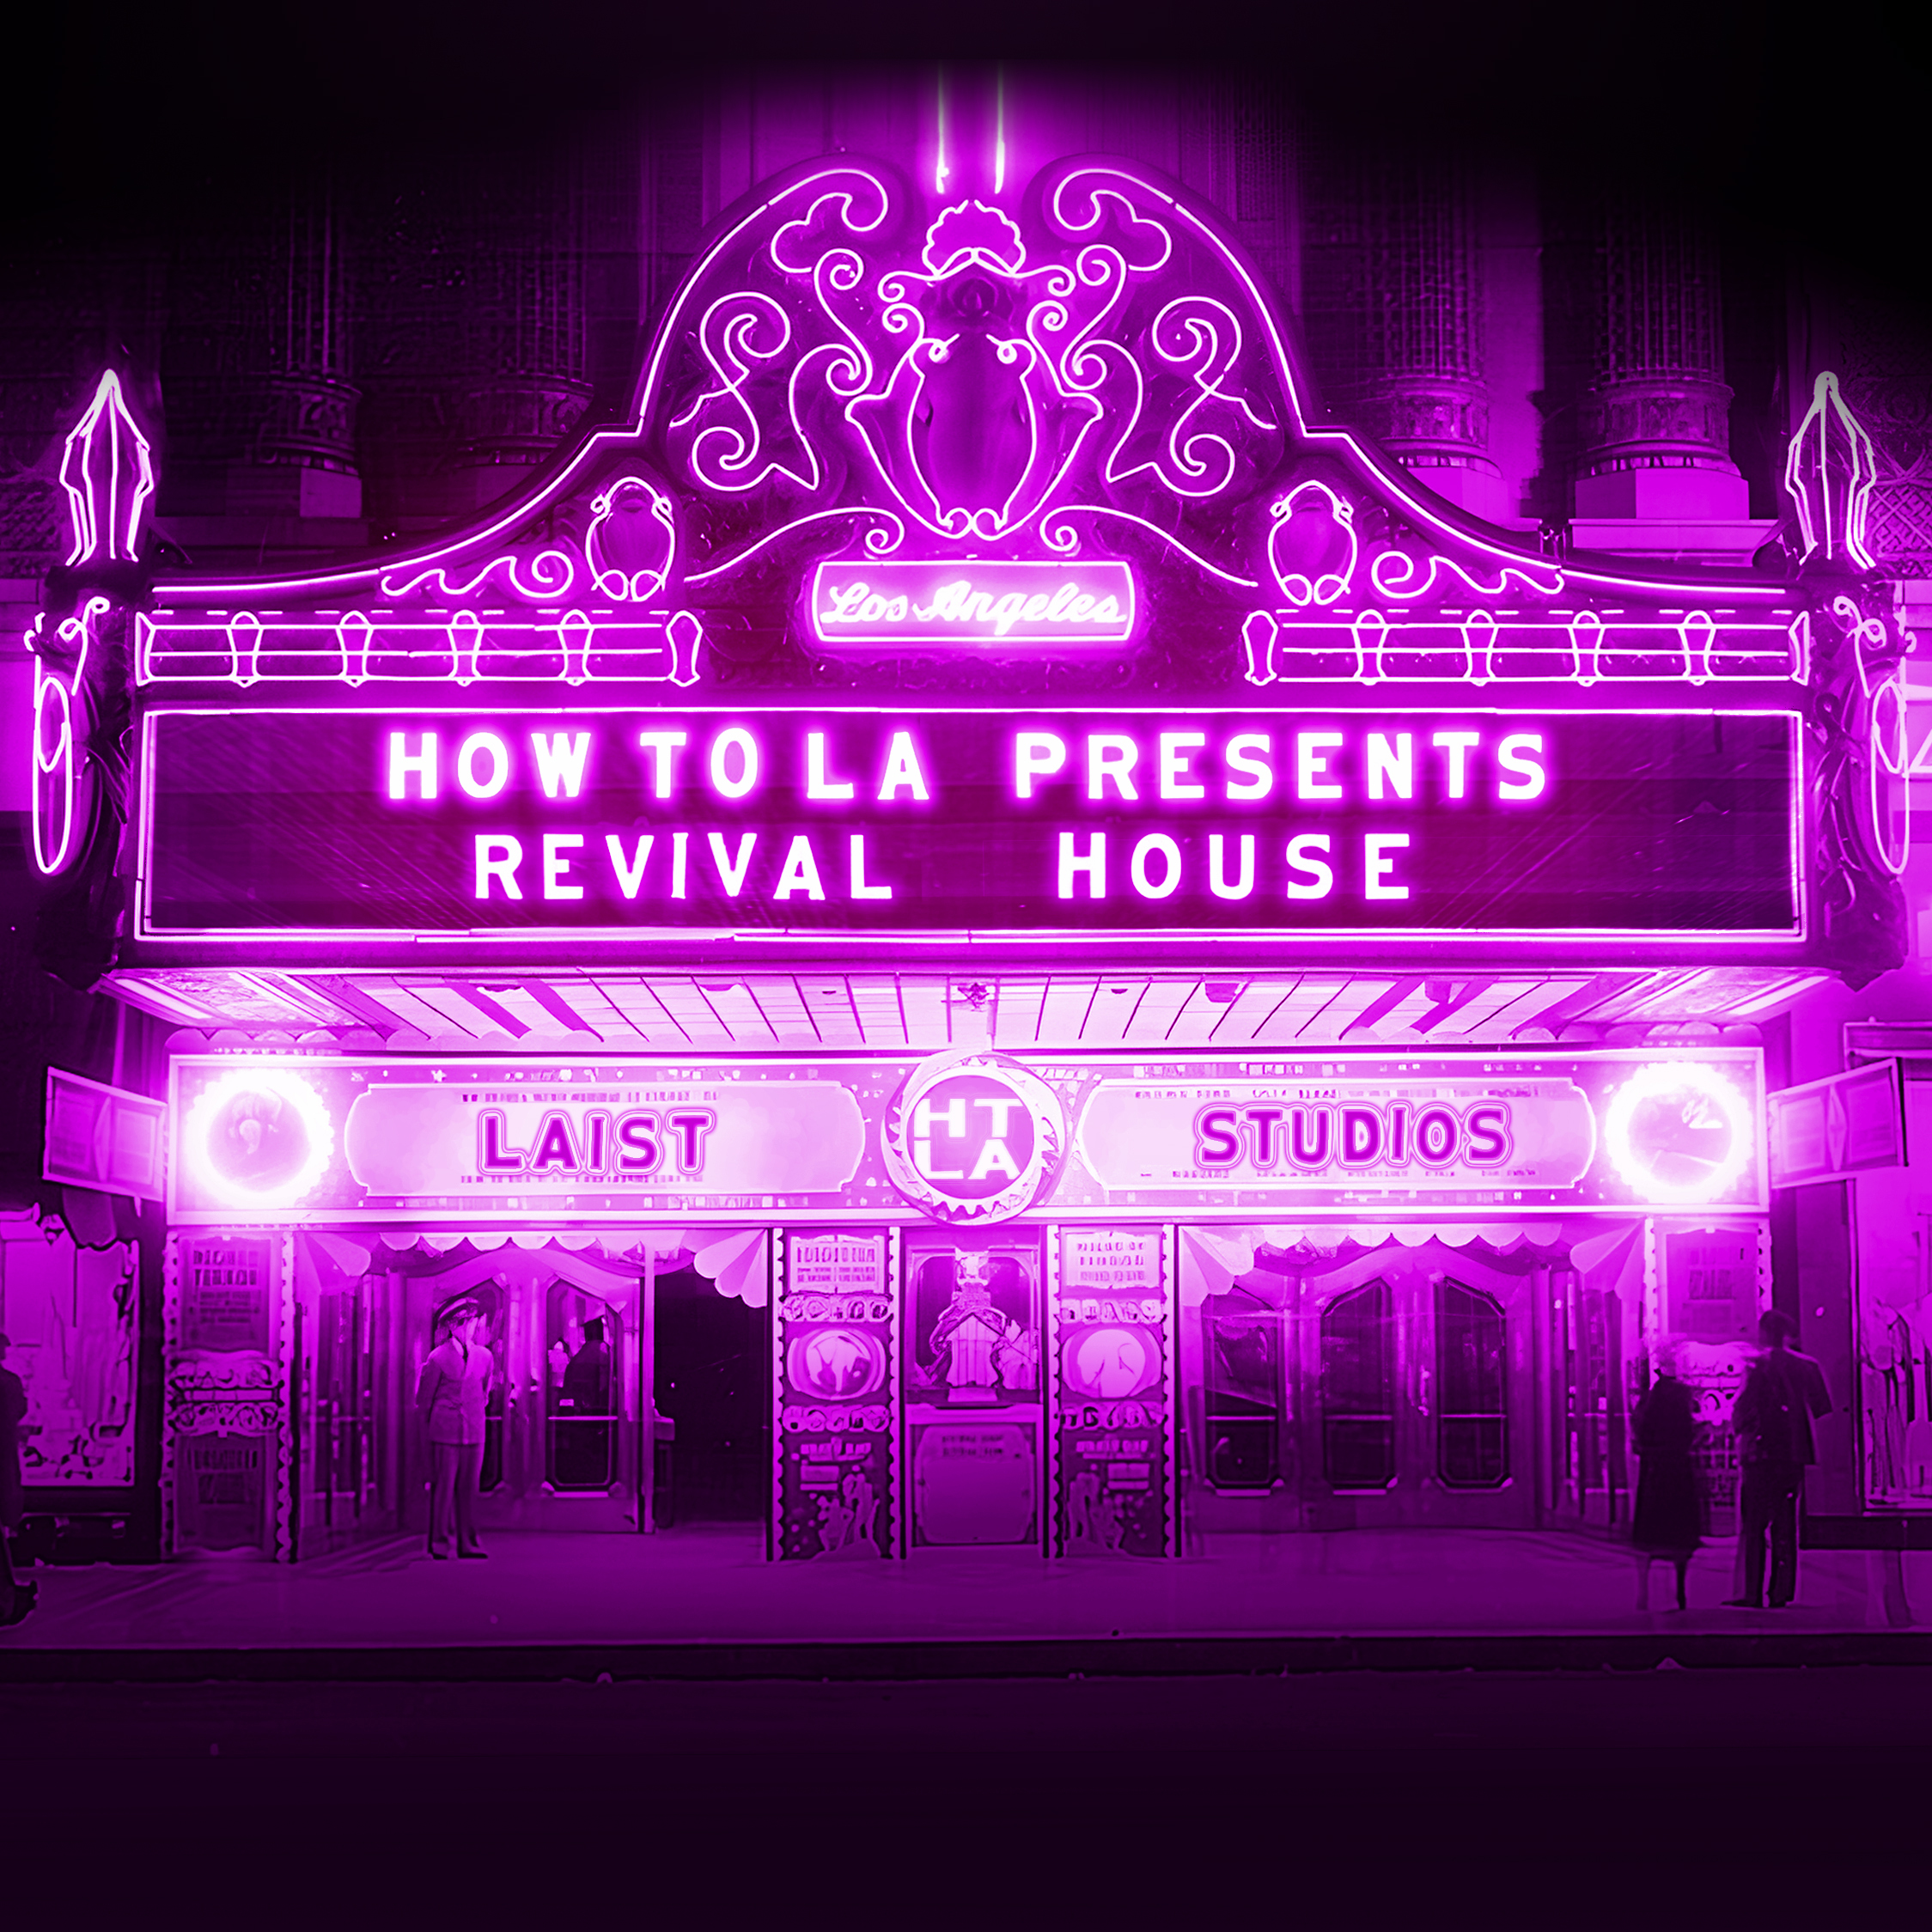 Revival House: The Long Road From Silent Films to Brain Dead Studios